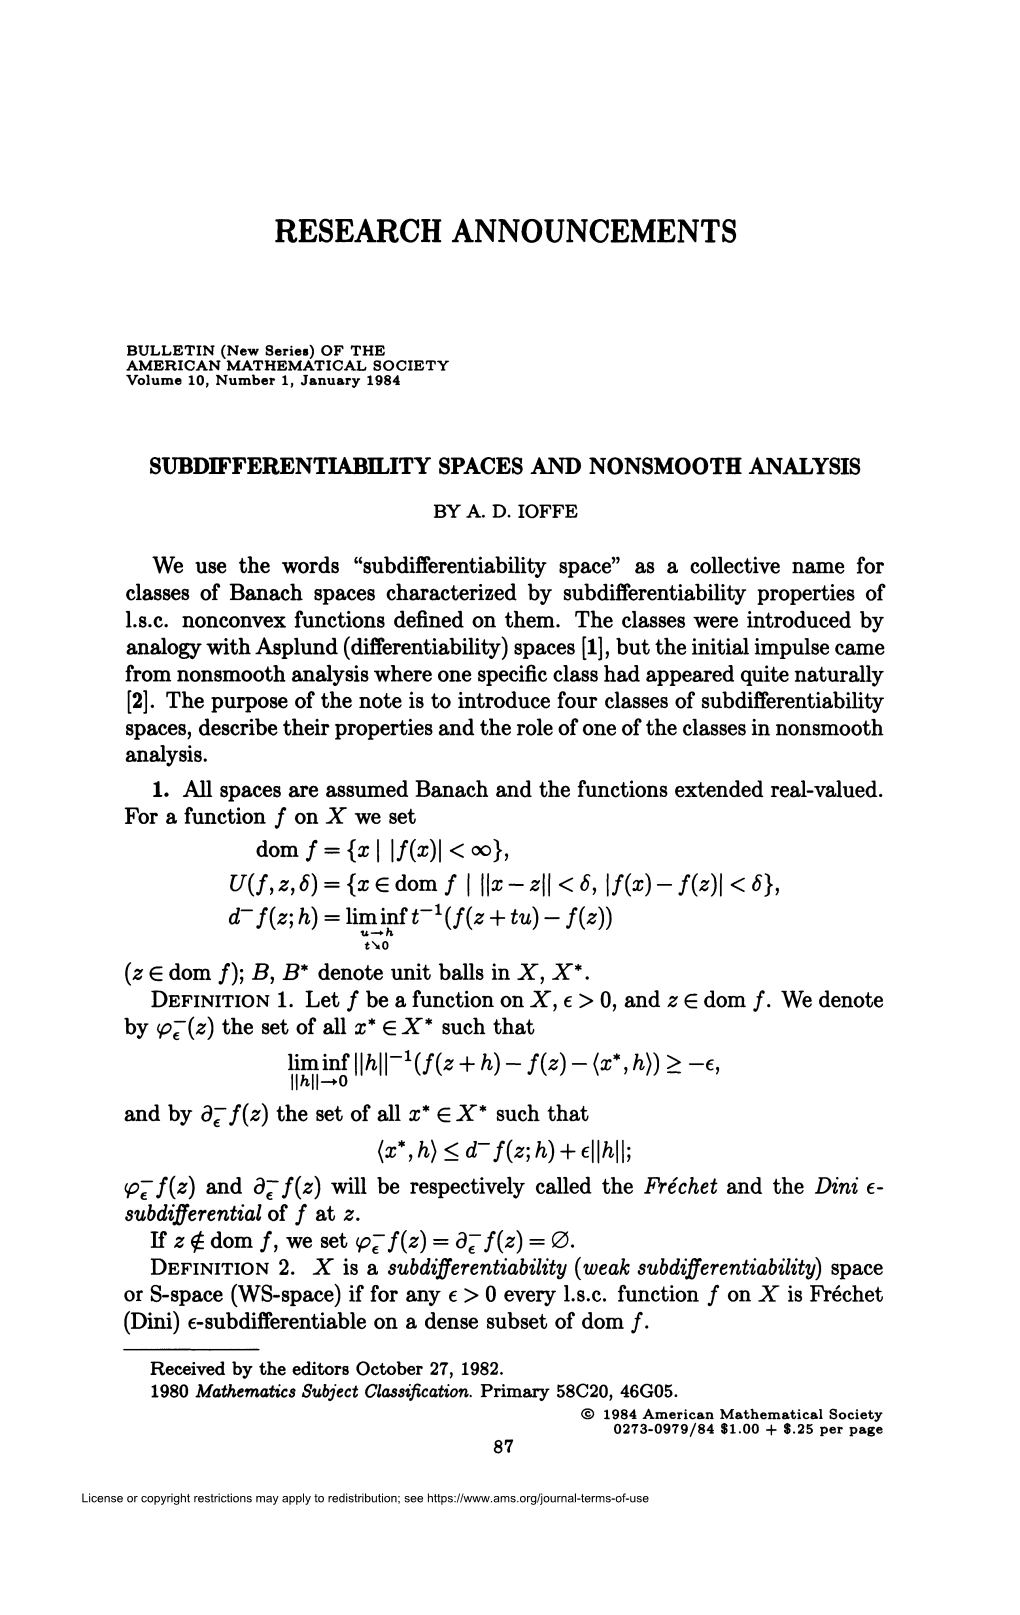 Subdifferentiability Spaces and Nonsmooth Analysis